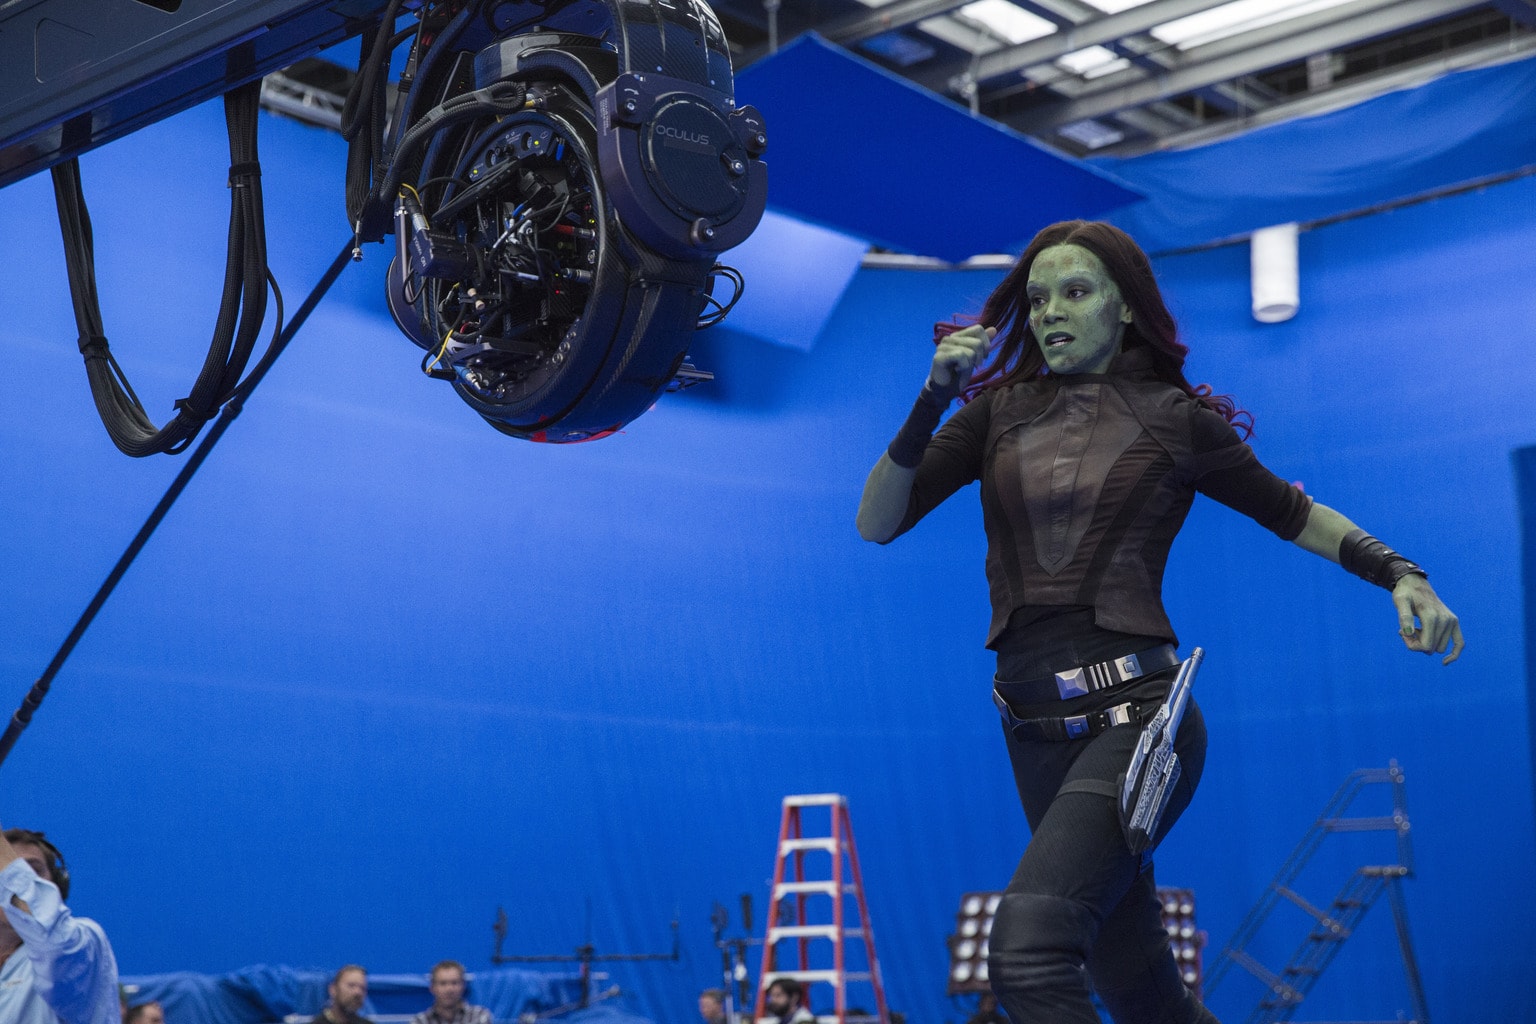 On Set and Behind the Scenes with James Gunn, Director, Guardians of the Galaxy Vol 2